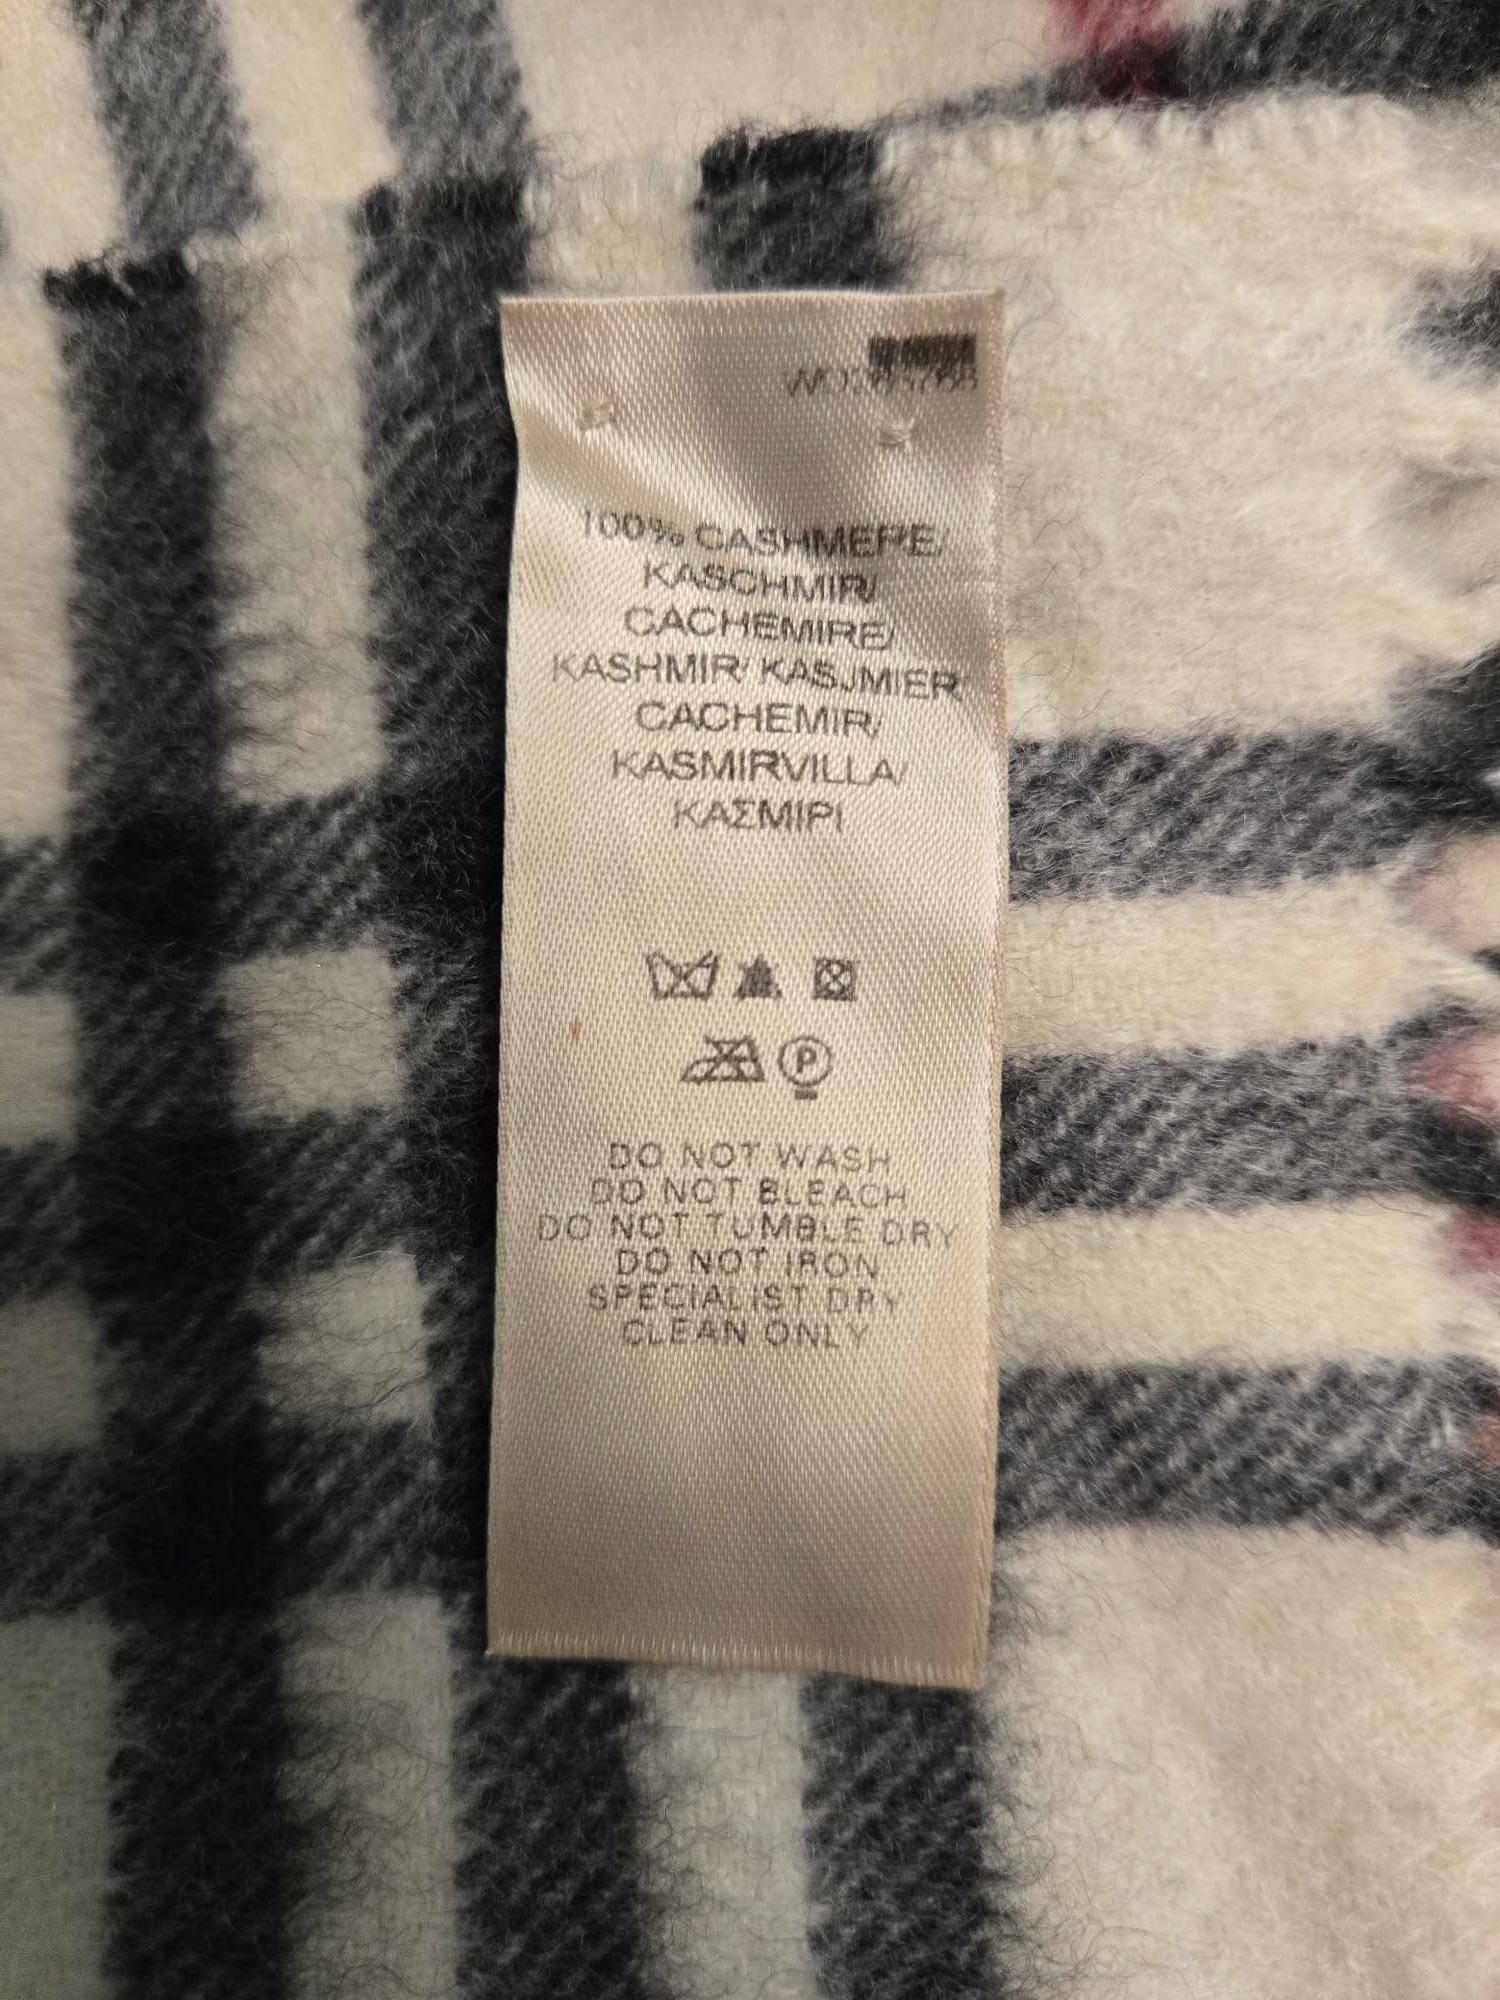 10 Vintage Pre-Owned Cashmere & Pashmina Scarves Incl. Authentic Burberry